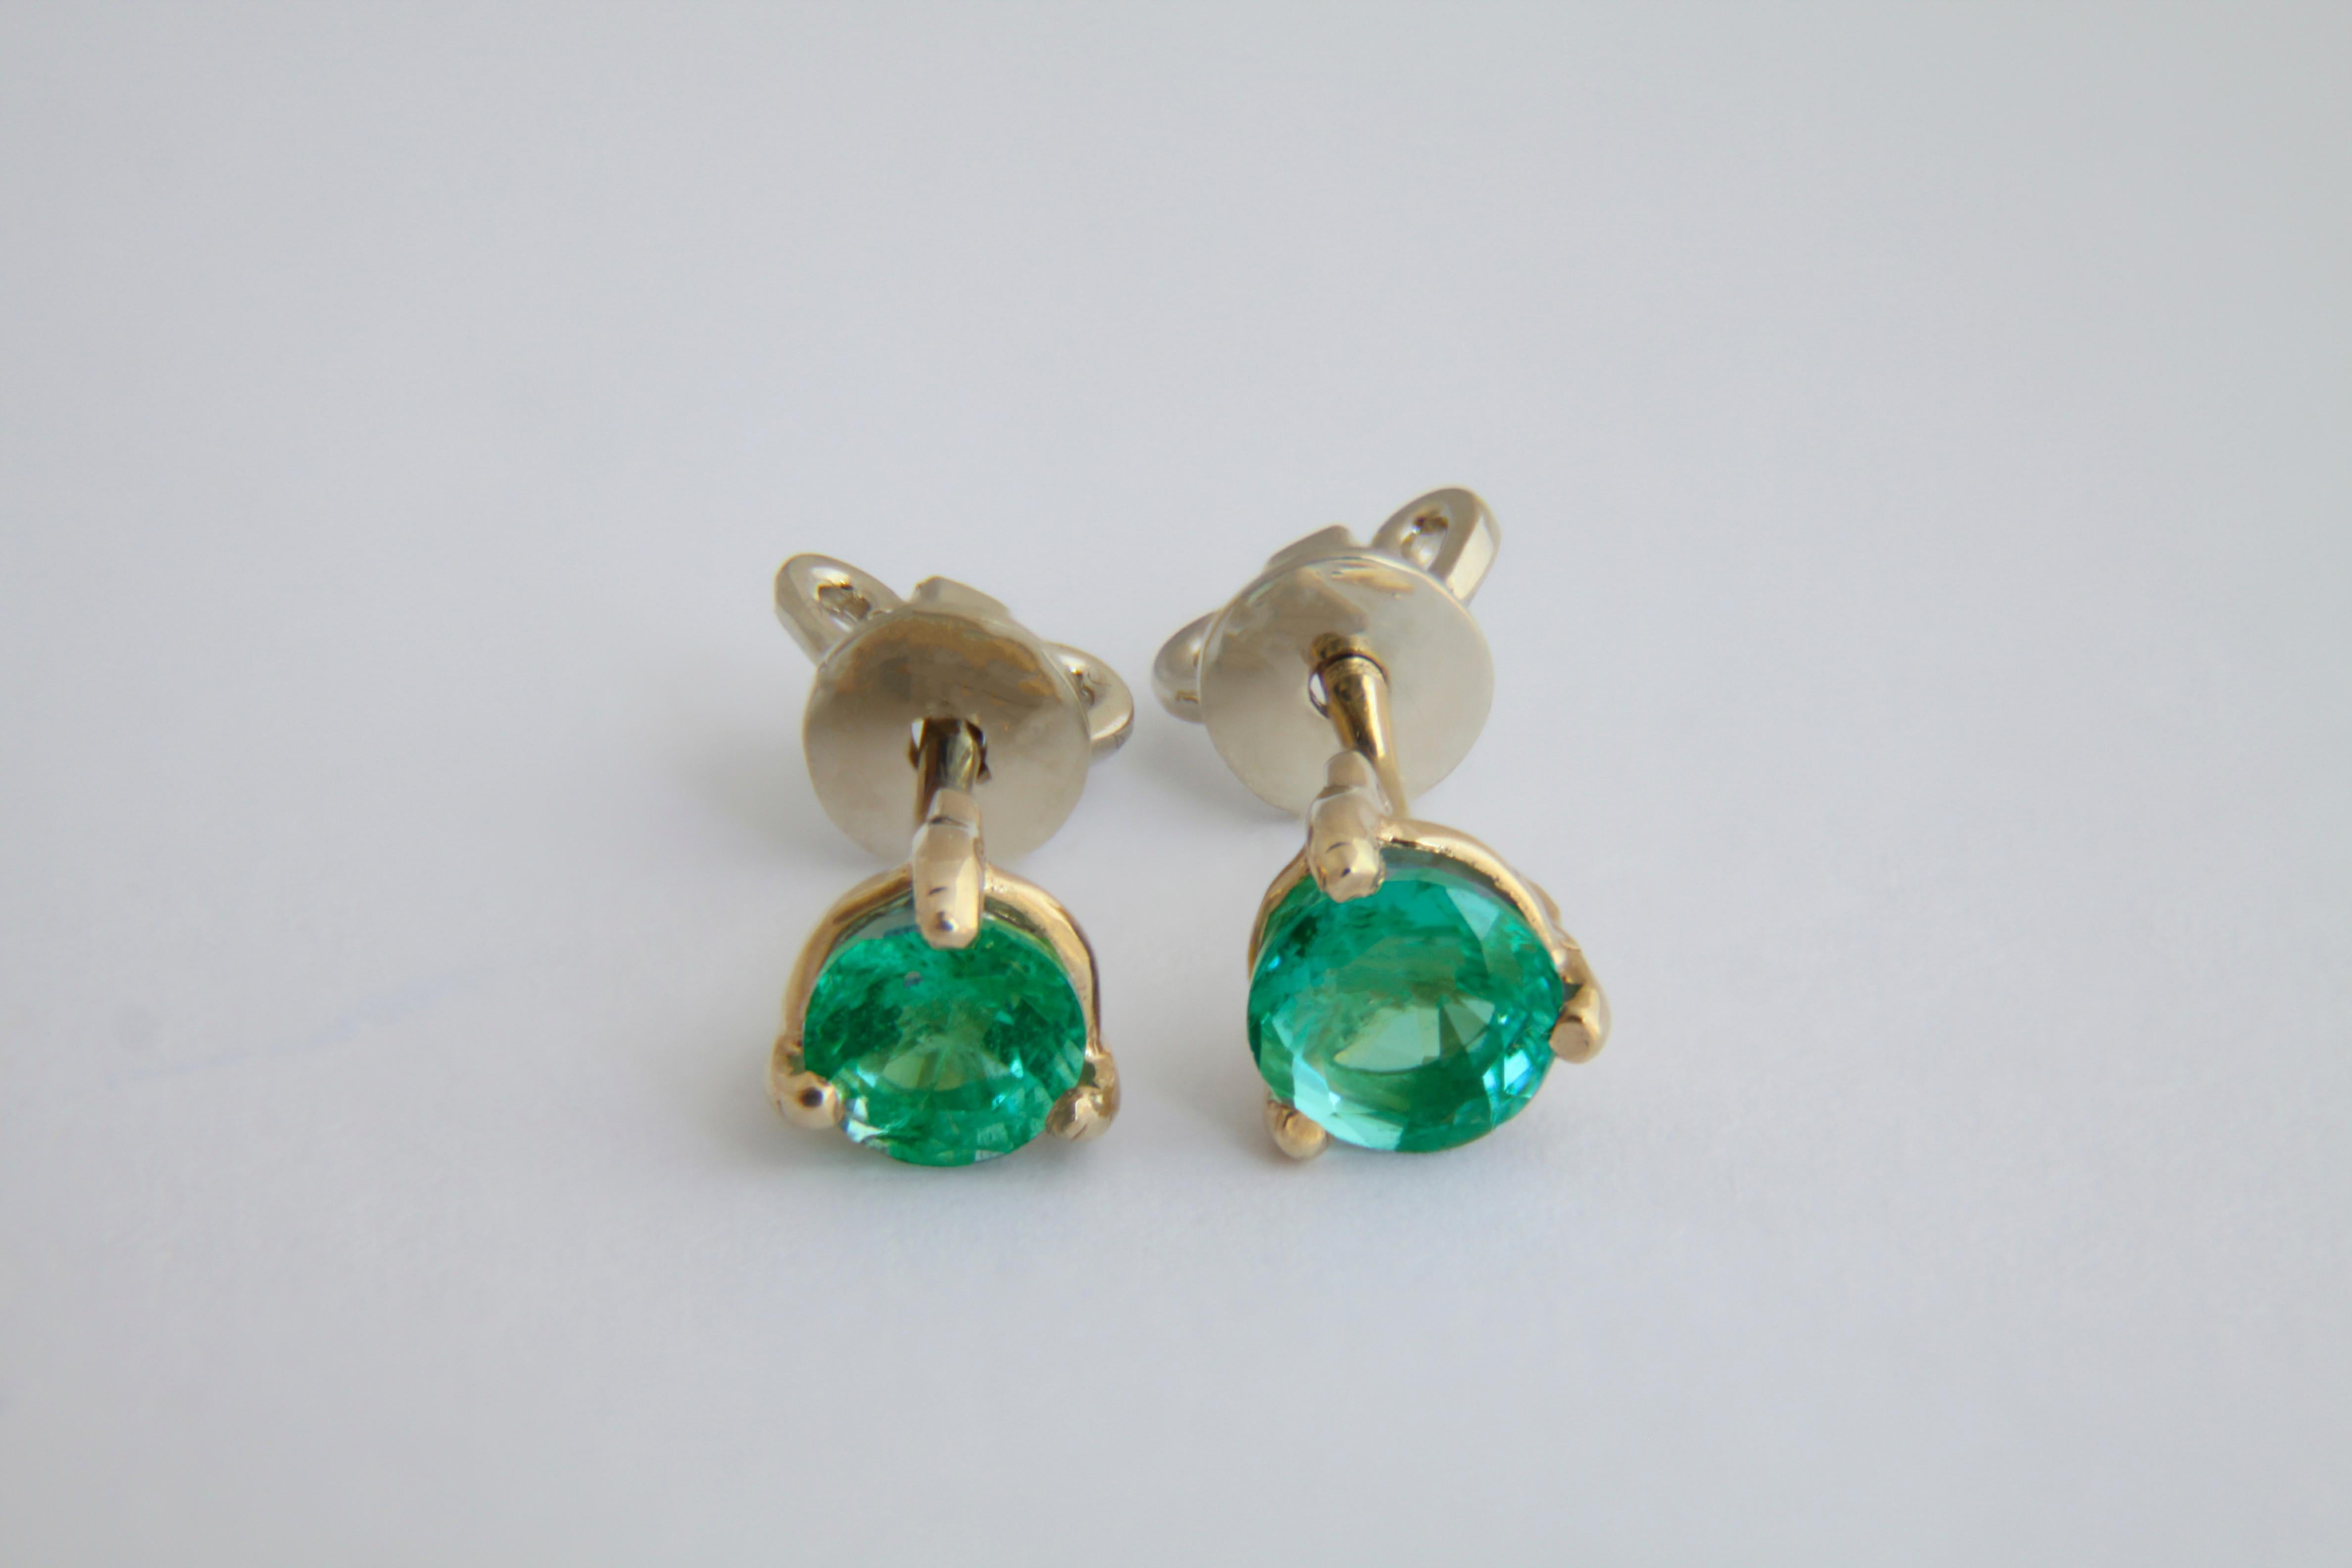 Natural emerald stud earrings. 14k solid gold earrings with emeralds. May birthstone earrings. Green gemstone studs. Round emerald earrings. 

Metal type: 14kt solid gold
Weight: 2 gr
Central stones: Natural emeralds
Cut: Round
size: 4-4.4mm
Total